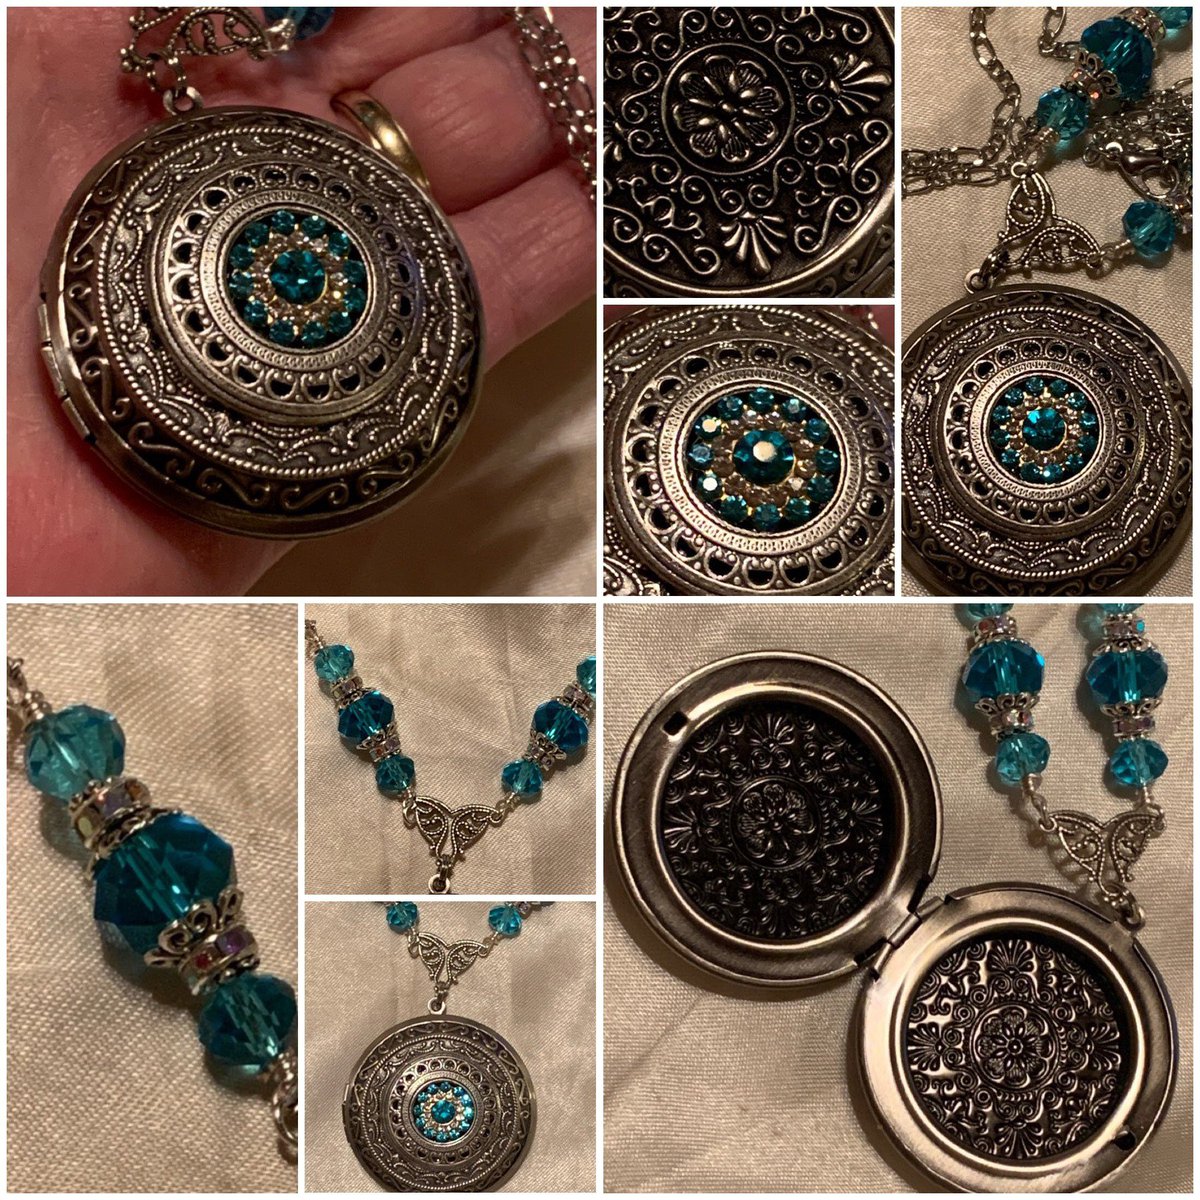 Excited to share this item from my #etsy shop: Victorian locket, vintage photo locket, peacock beads, faceted beads, rhinestones, birthday gift for her, https://t.co/V9dgCneYVj https://t.co/rTY54W4Kz0